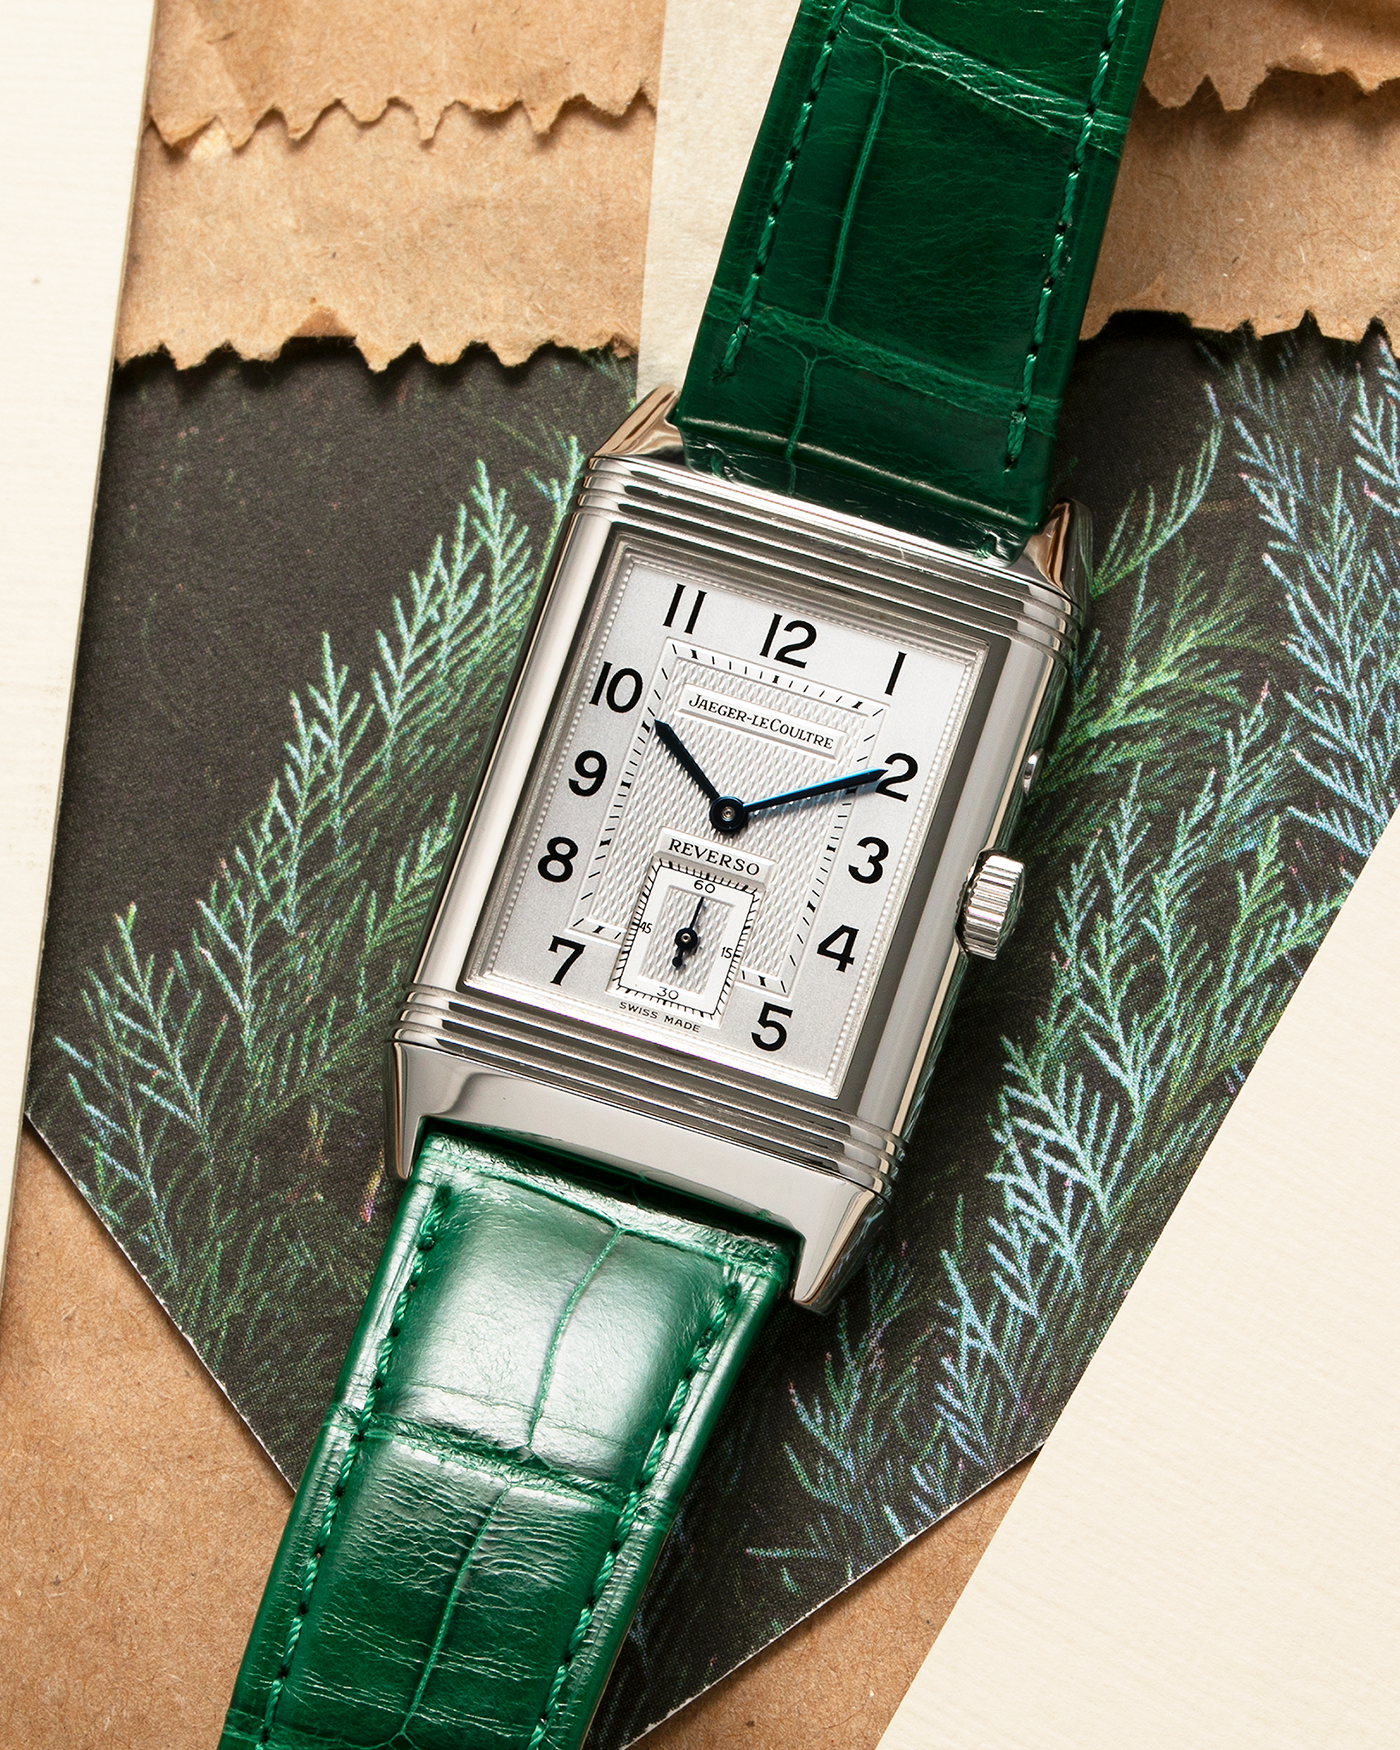 Brand: Jaeger LeCoultre Year: 1999 Model: Reverso Duoface Japan Edition Green, Limited Edition of 300 Pieces Reference Number: 270.8.54 Material: Stainless Steel Movement: Jaeger LeCoultre Cal. 854, Manual-Wind Case Diameter: 42mm x 26mm Lug Width: 19mm Strap: Jaeger LeCoultre Green Alligator Leather with Signed Stainless Steel Deployant Clasp